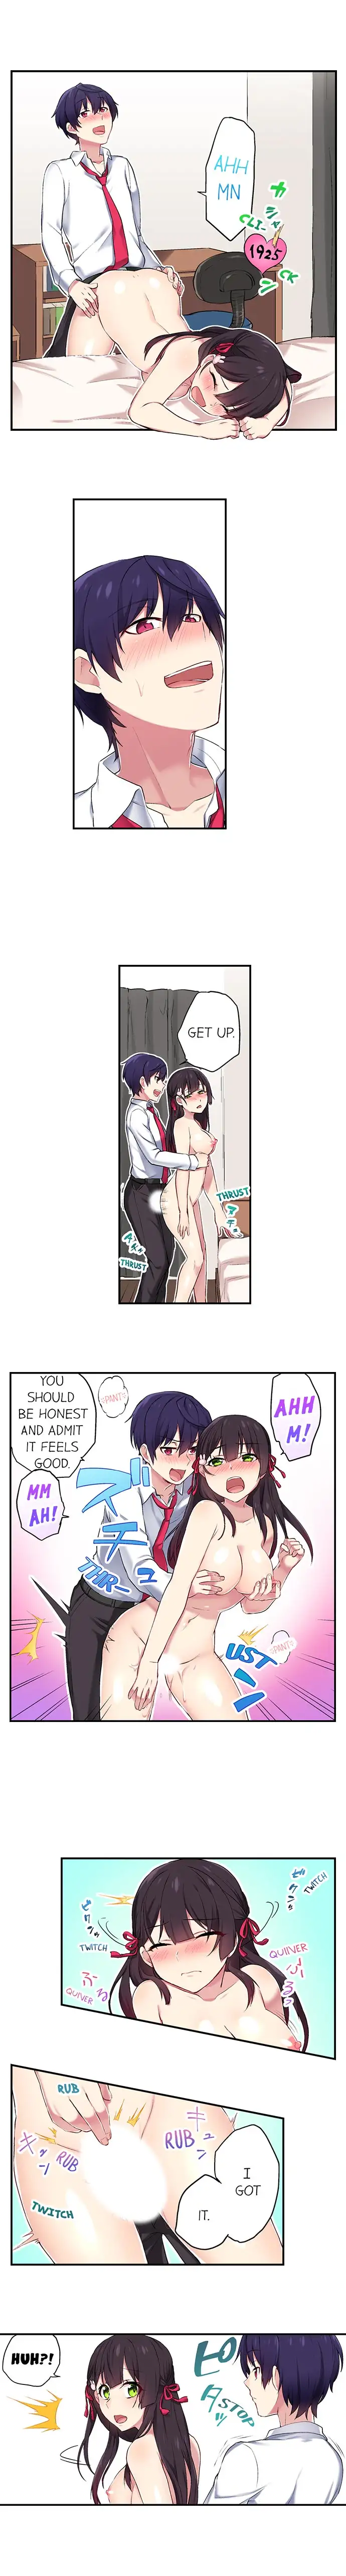 Committee Chairman, Didn’t You Just Masturbate In the Bathroom? I Can See the Number of Times People Orgasm - Chapter 9 Page 2